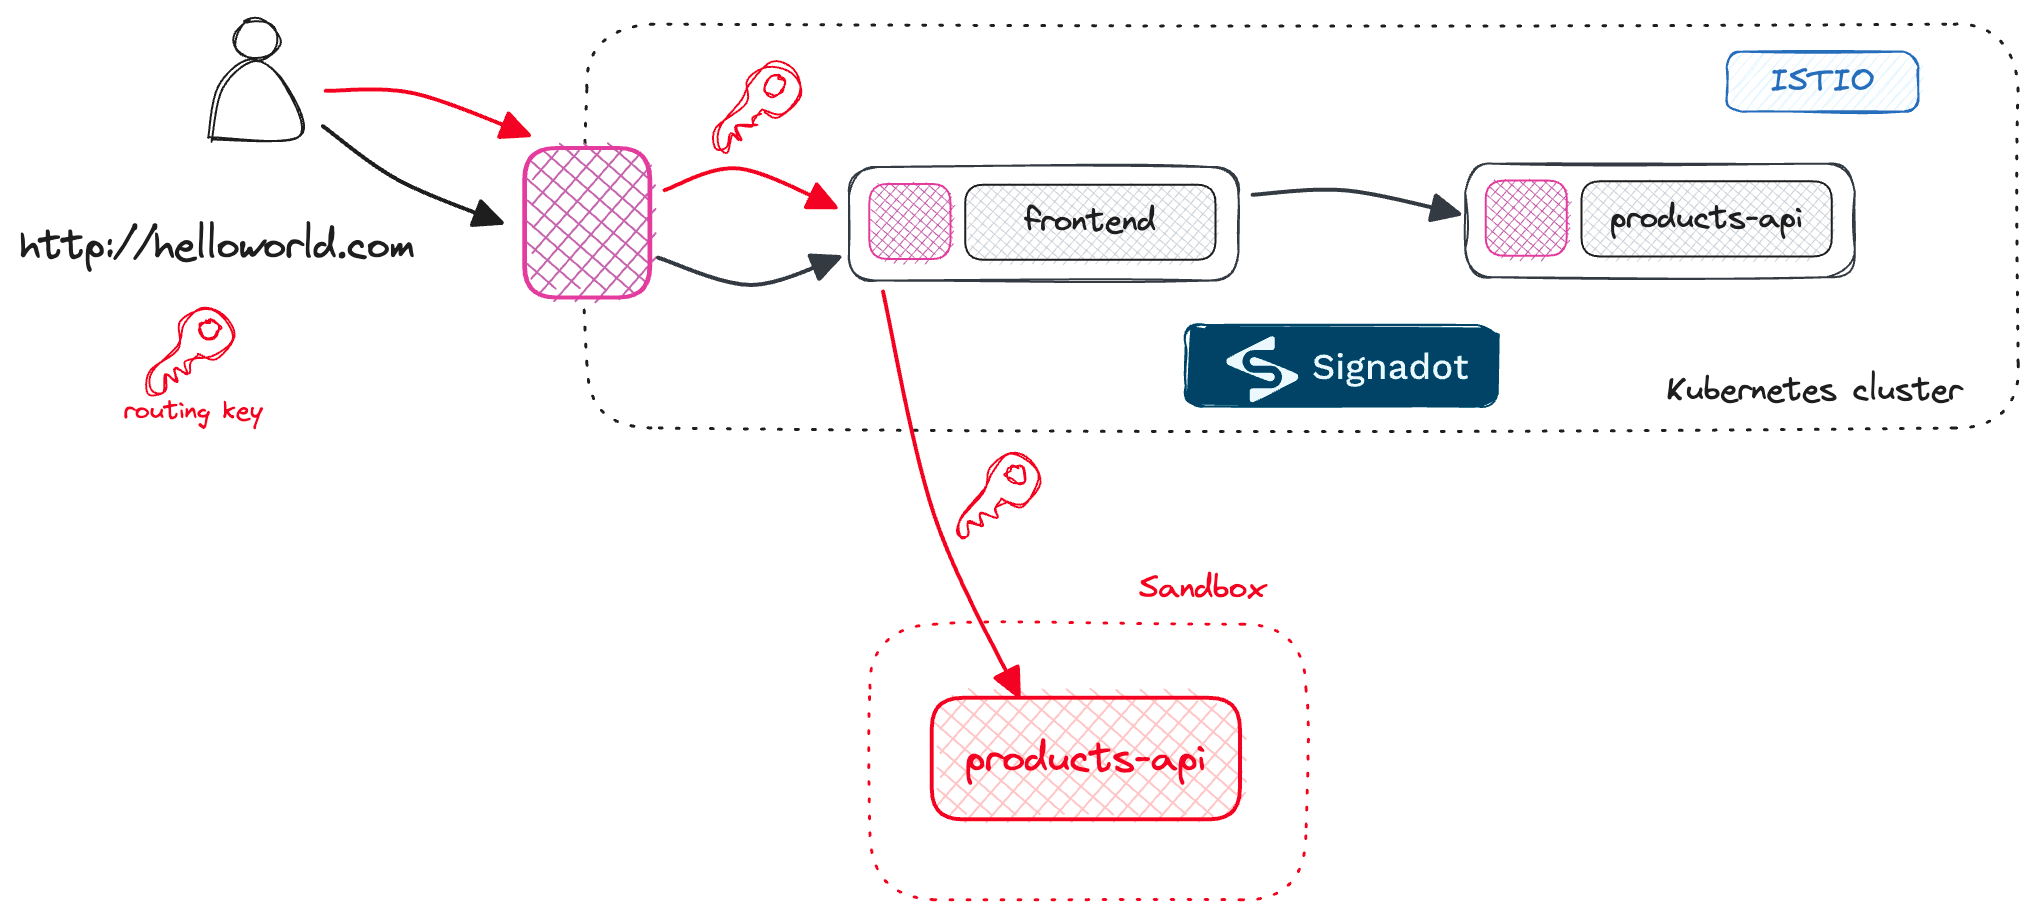 Signadot with routing key